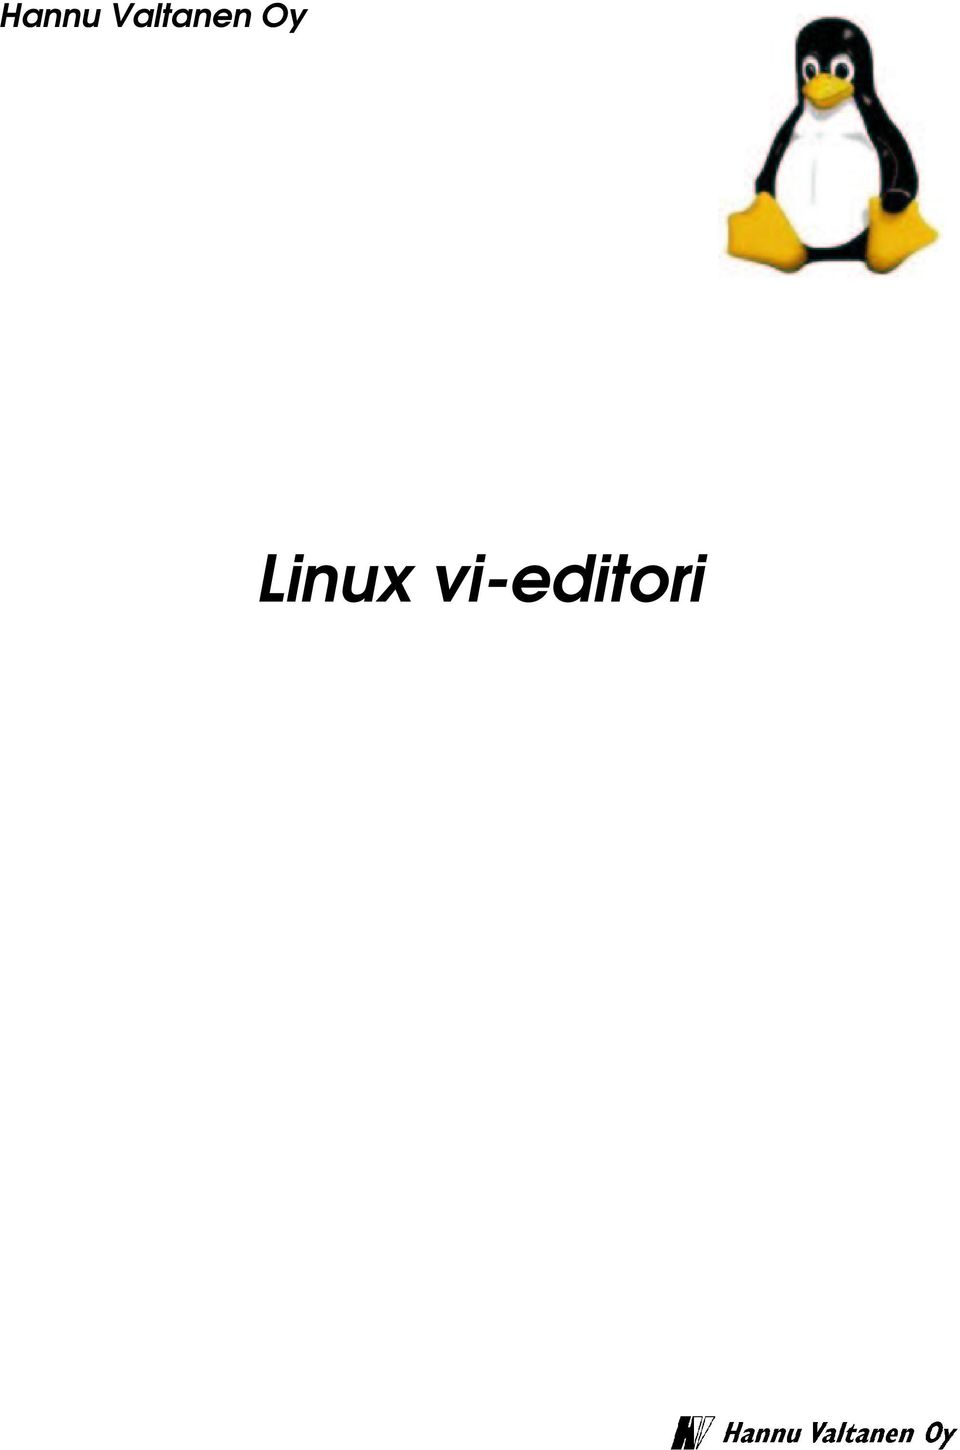 Oy Linux